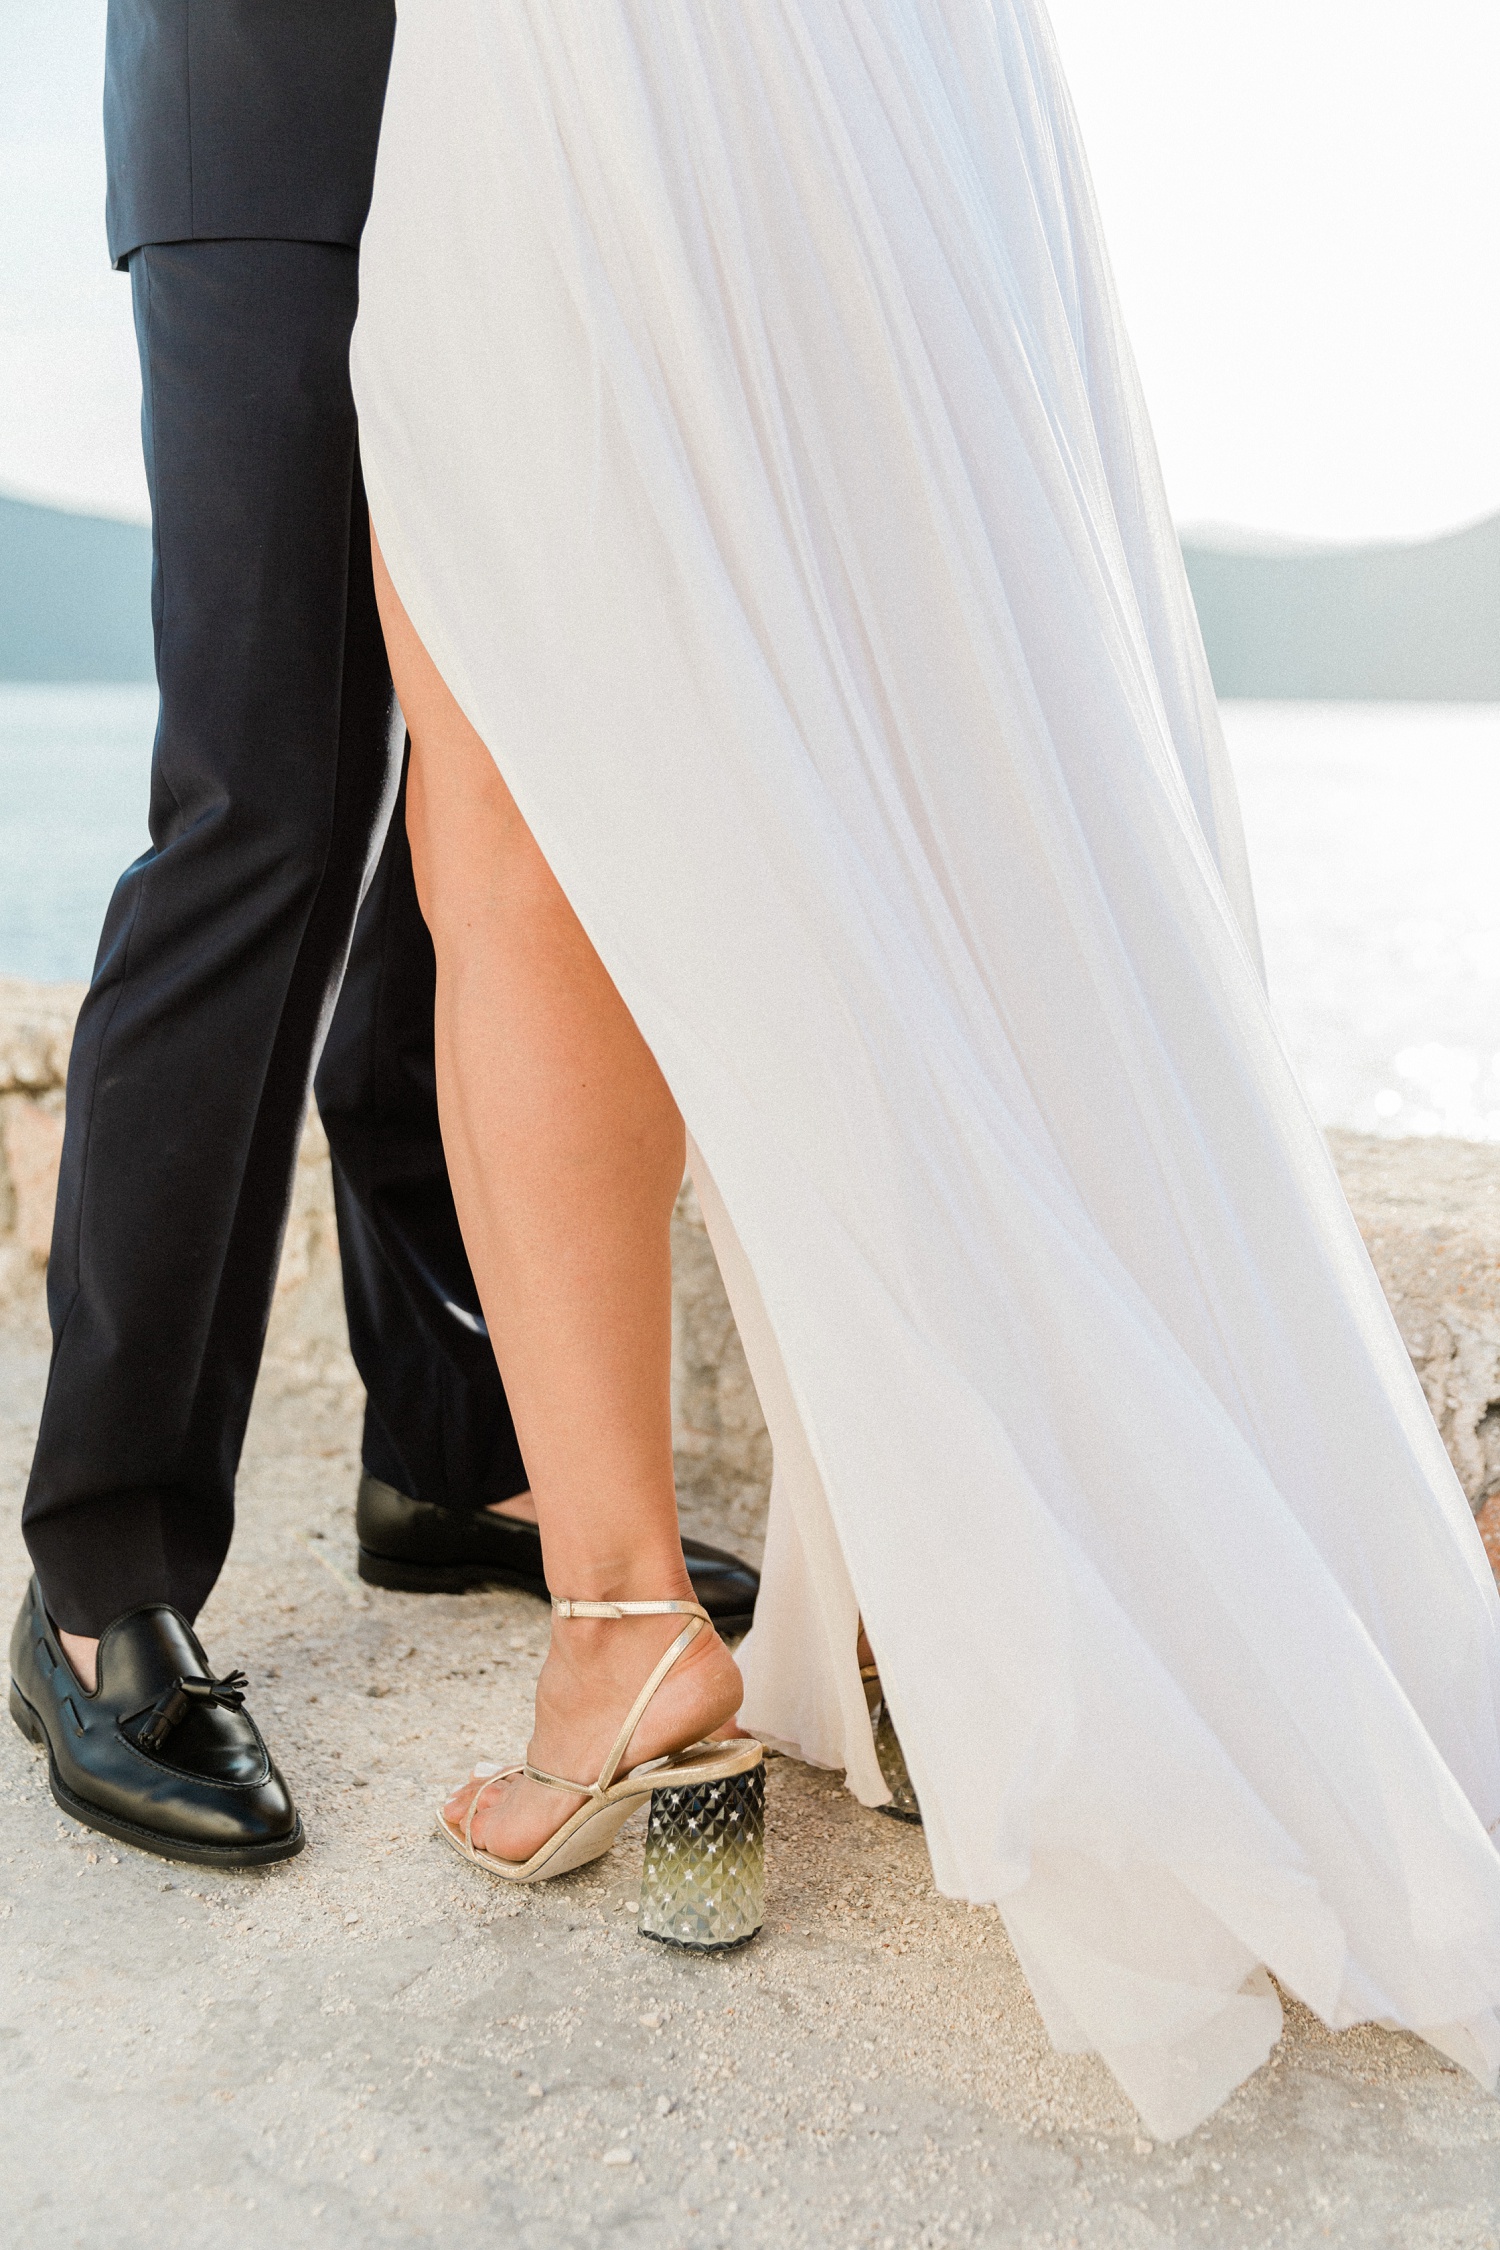 Detail image of a bride wearing statement gold and green Jimmy Choo heels with a Dana Harel gown